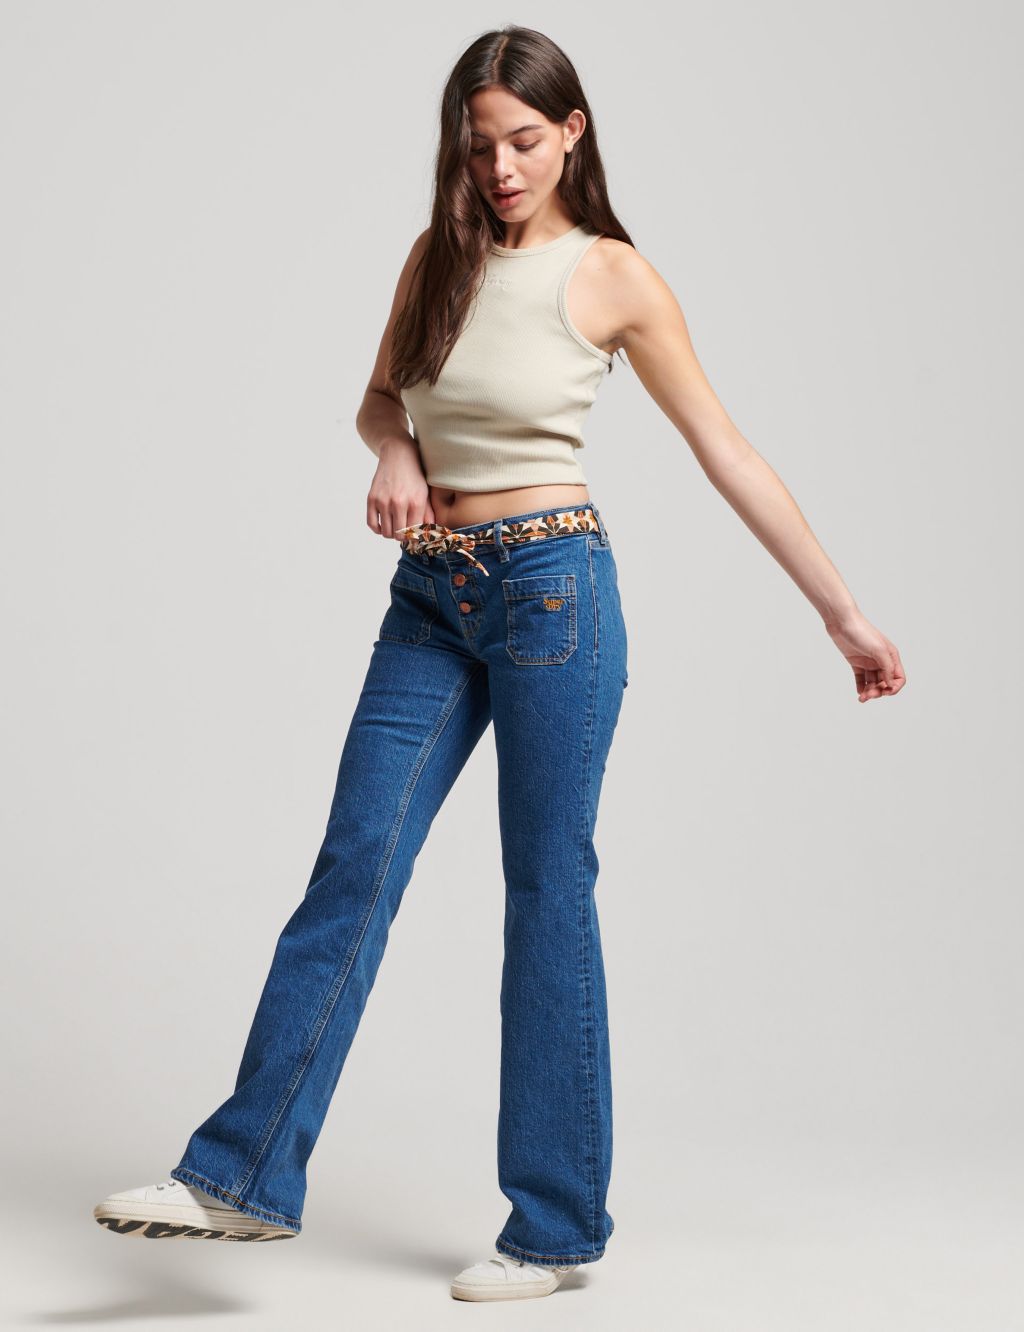 Mid-rise flared jeans - Women